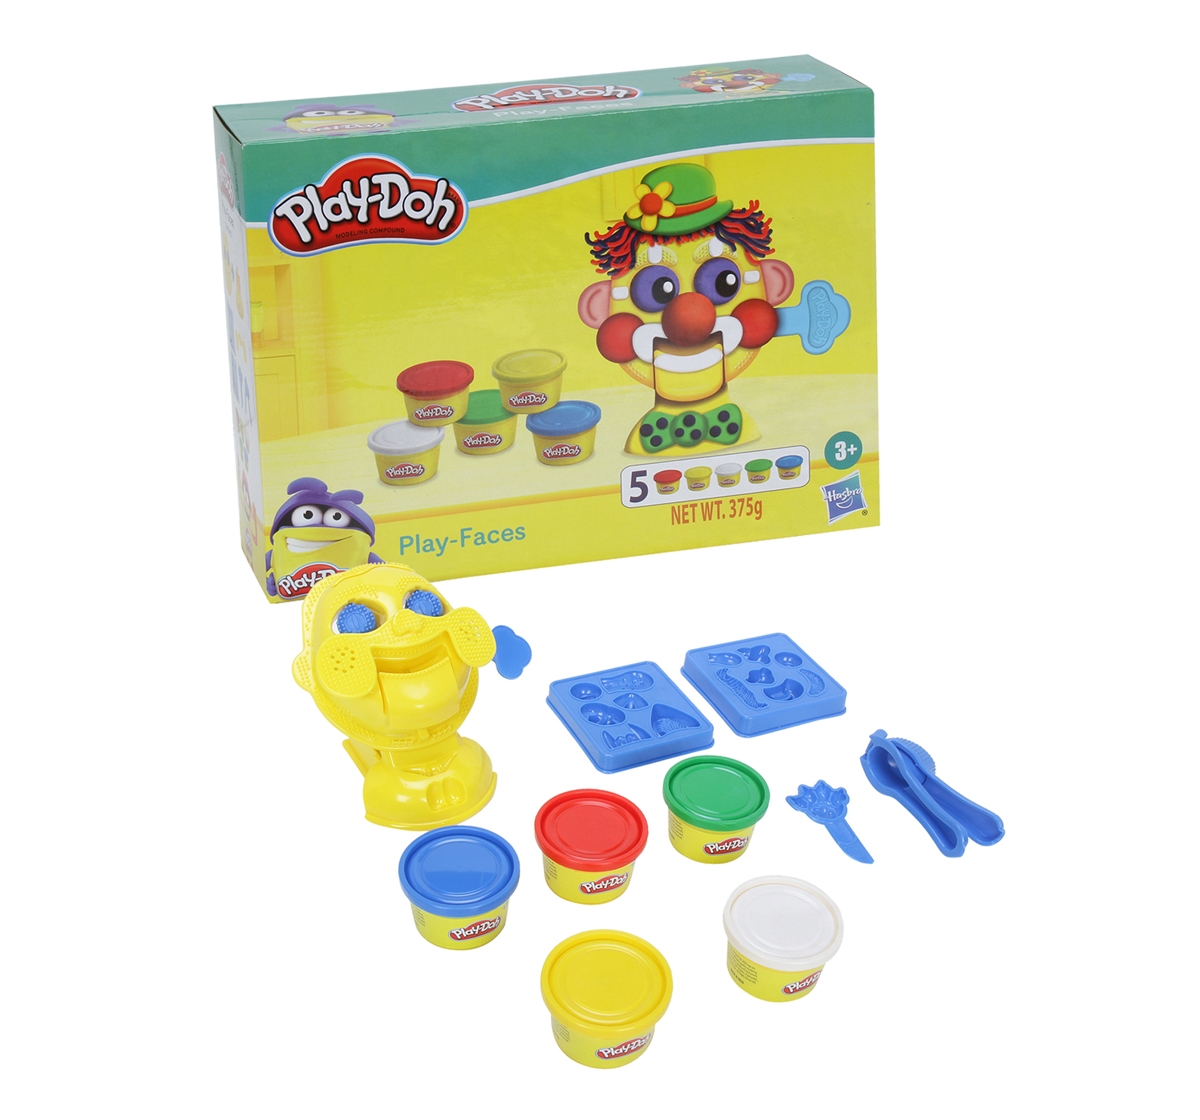 Play-Doh | Play Doh Play Faces Activity Toy for Kids 3Y+, Multicolour 0